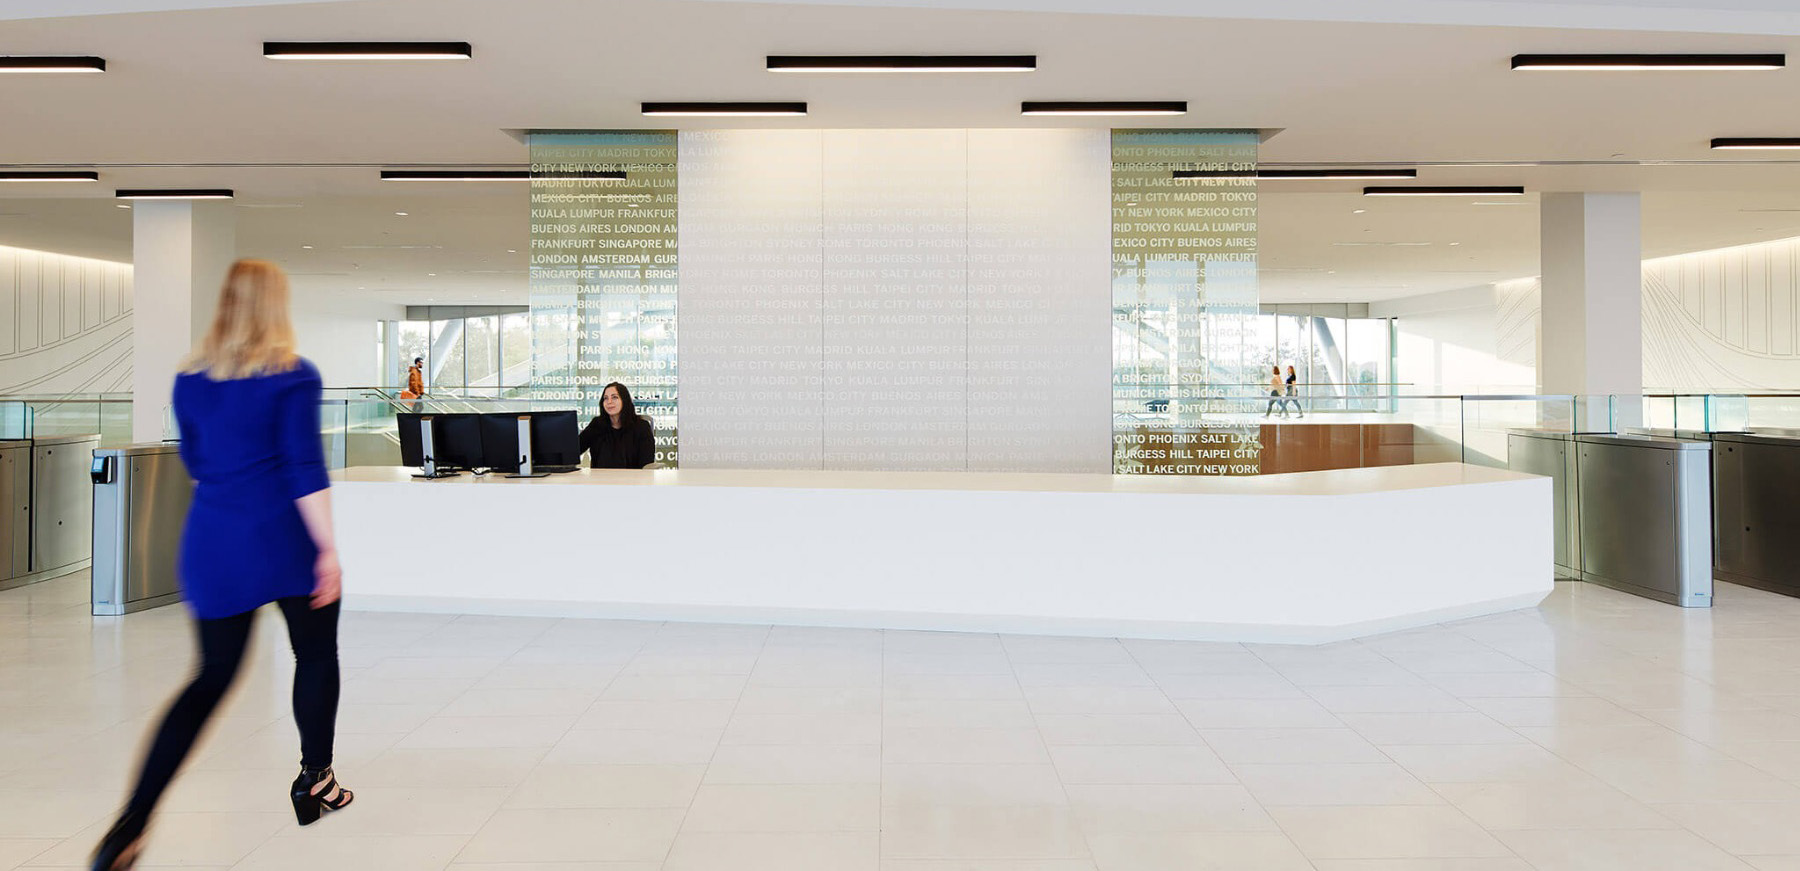 Black LED linear ceiling lights offer general lighting and aesthetic contrast against an office lobby’s cream ceiling.